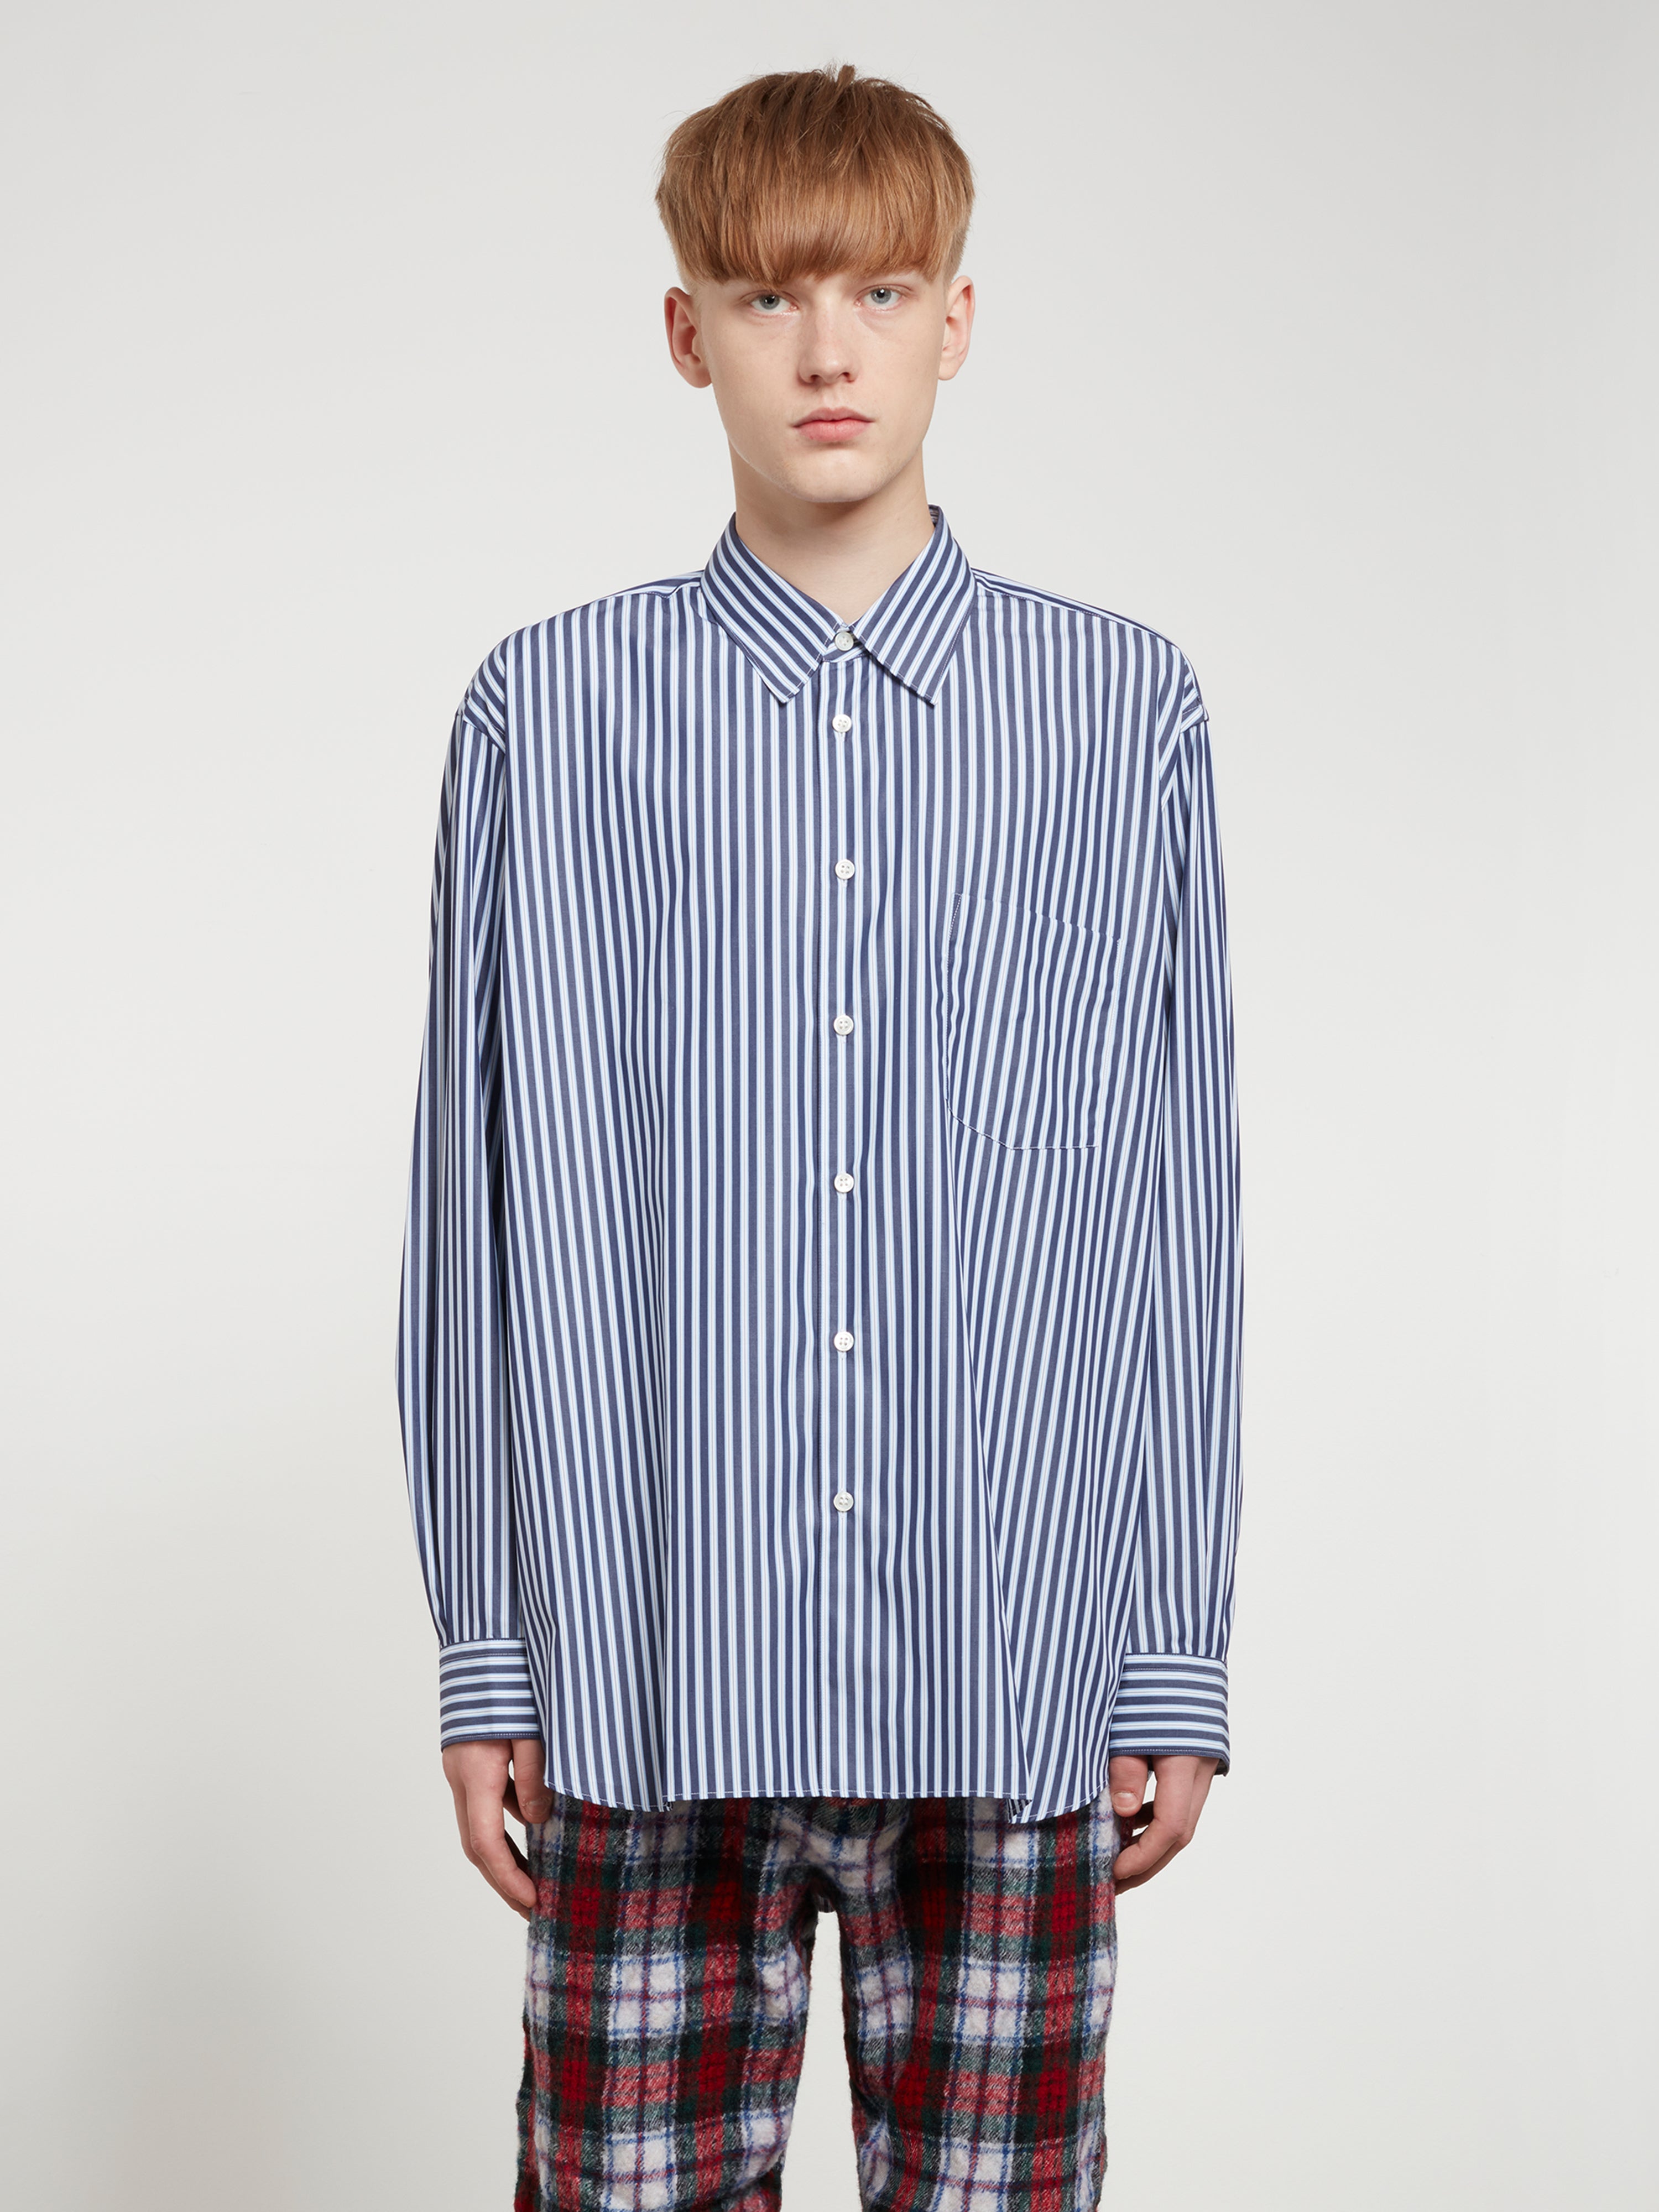 CDG Shirt Forever - Wide Fit Cotton Shirt - (Stripe 3)